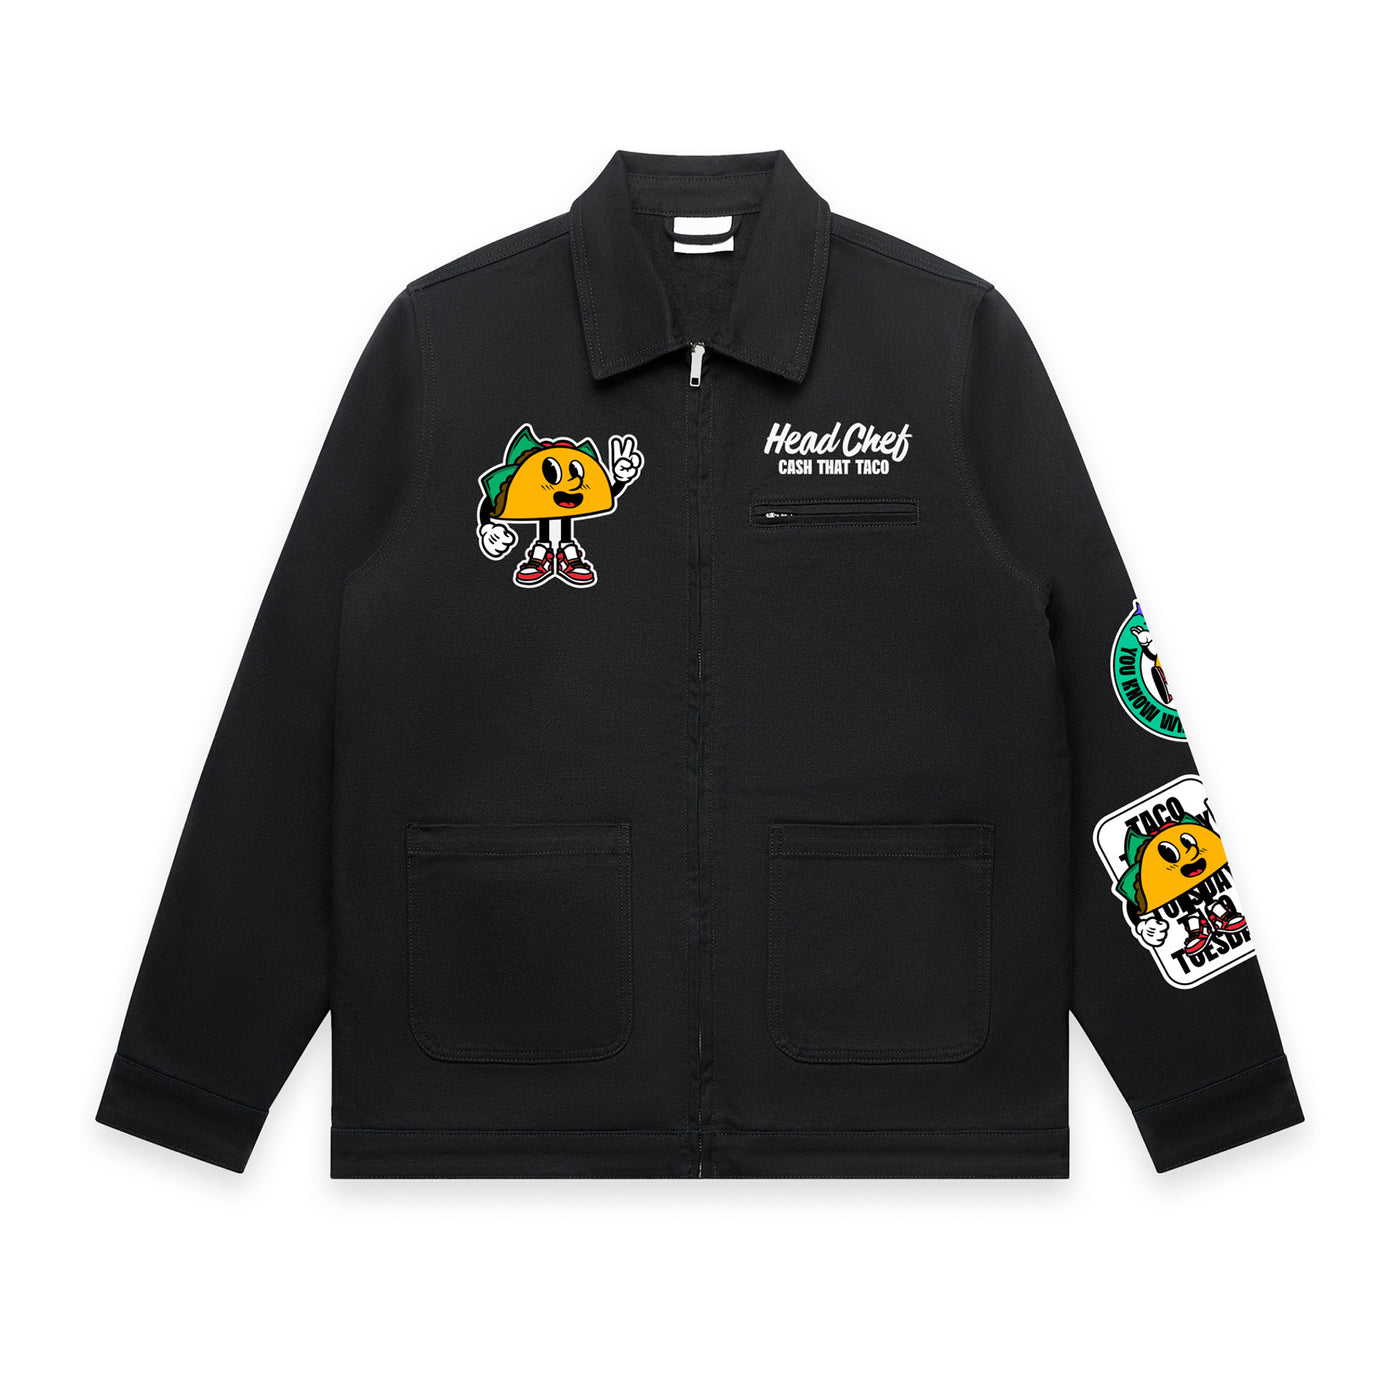 The Head Chef Workers Jacket